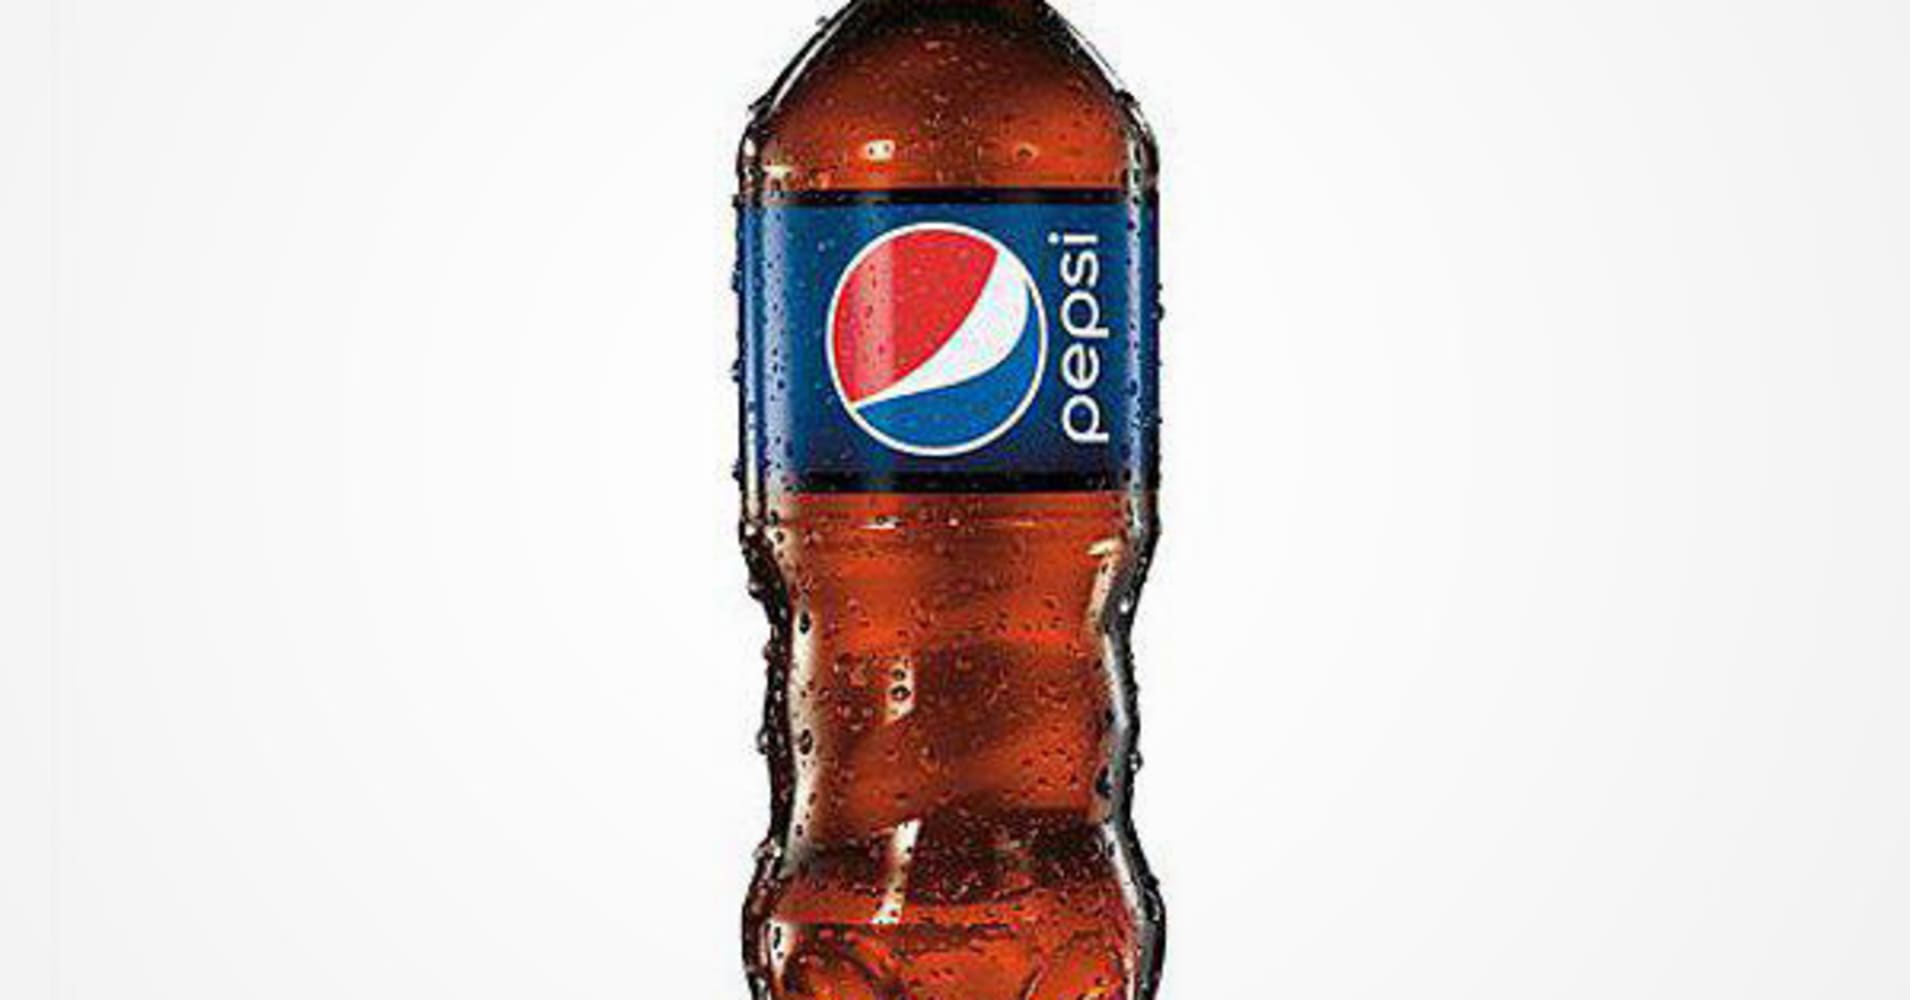 Pepsi Unveils First Bottle Redesign in 17 Years